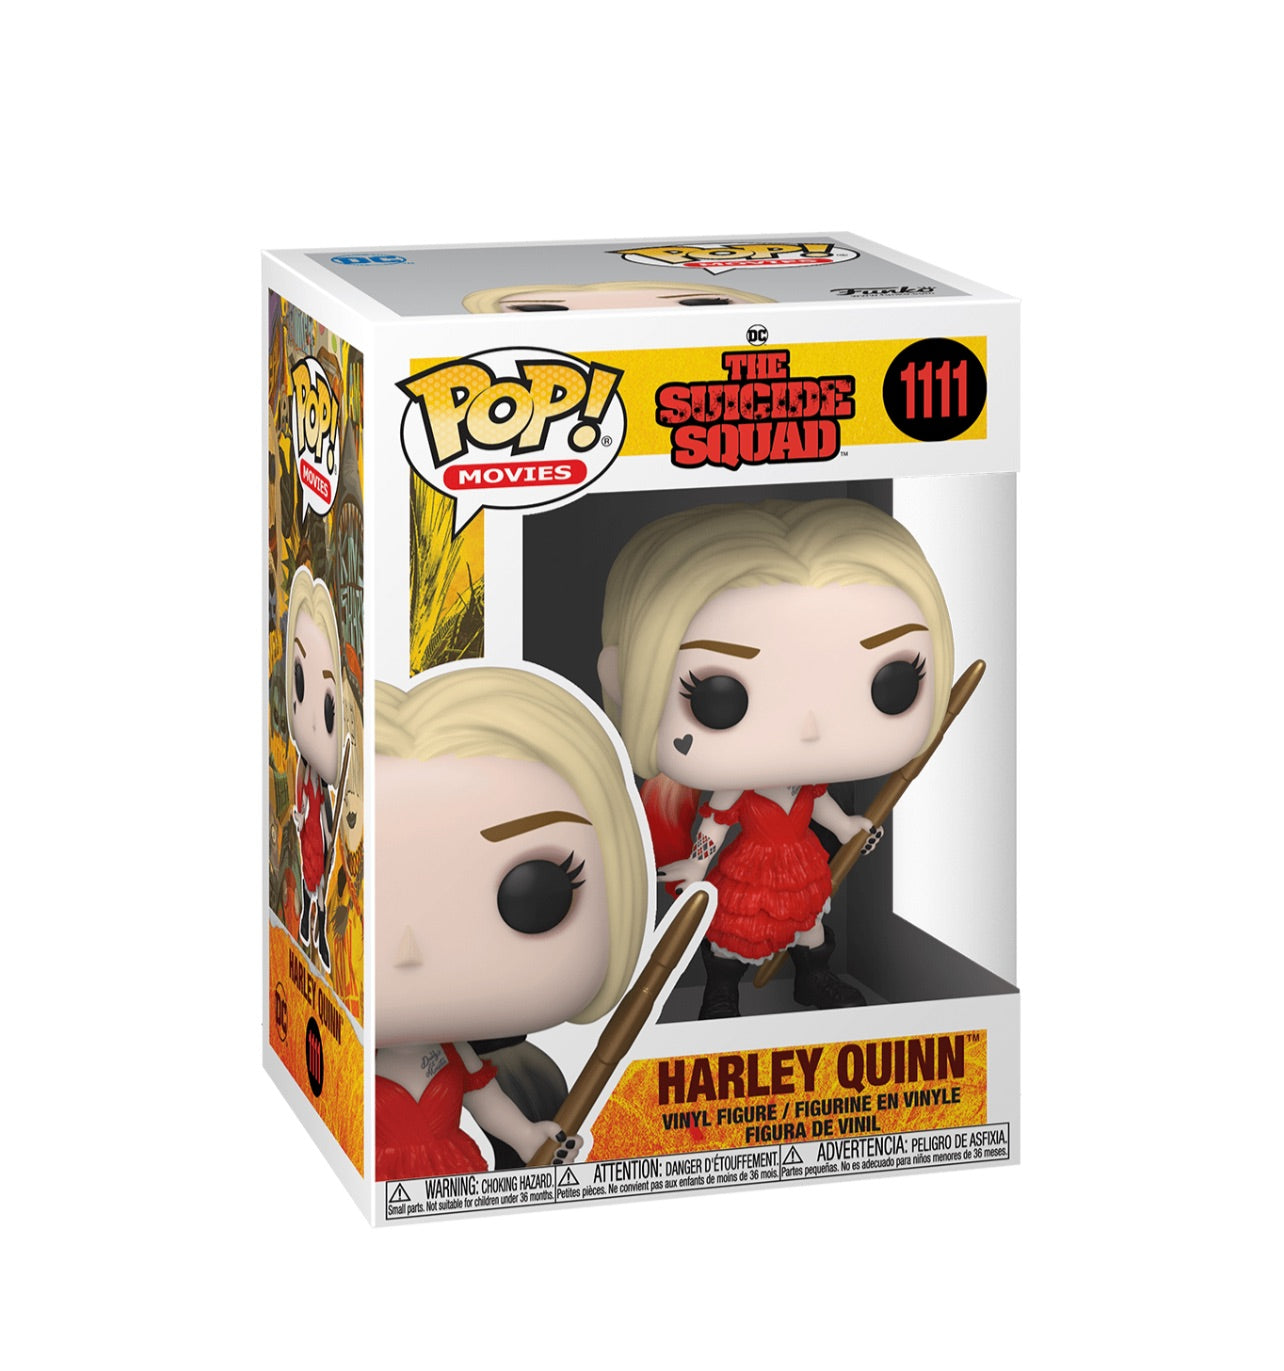 POP! Movies Suicide Squad Harley Quinn #1111